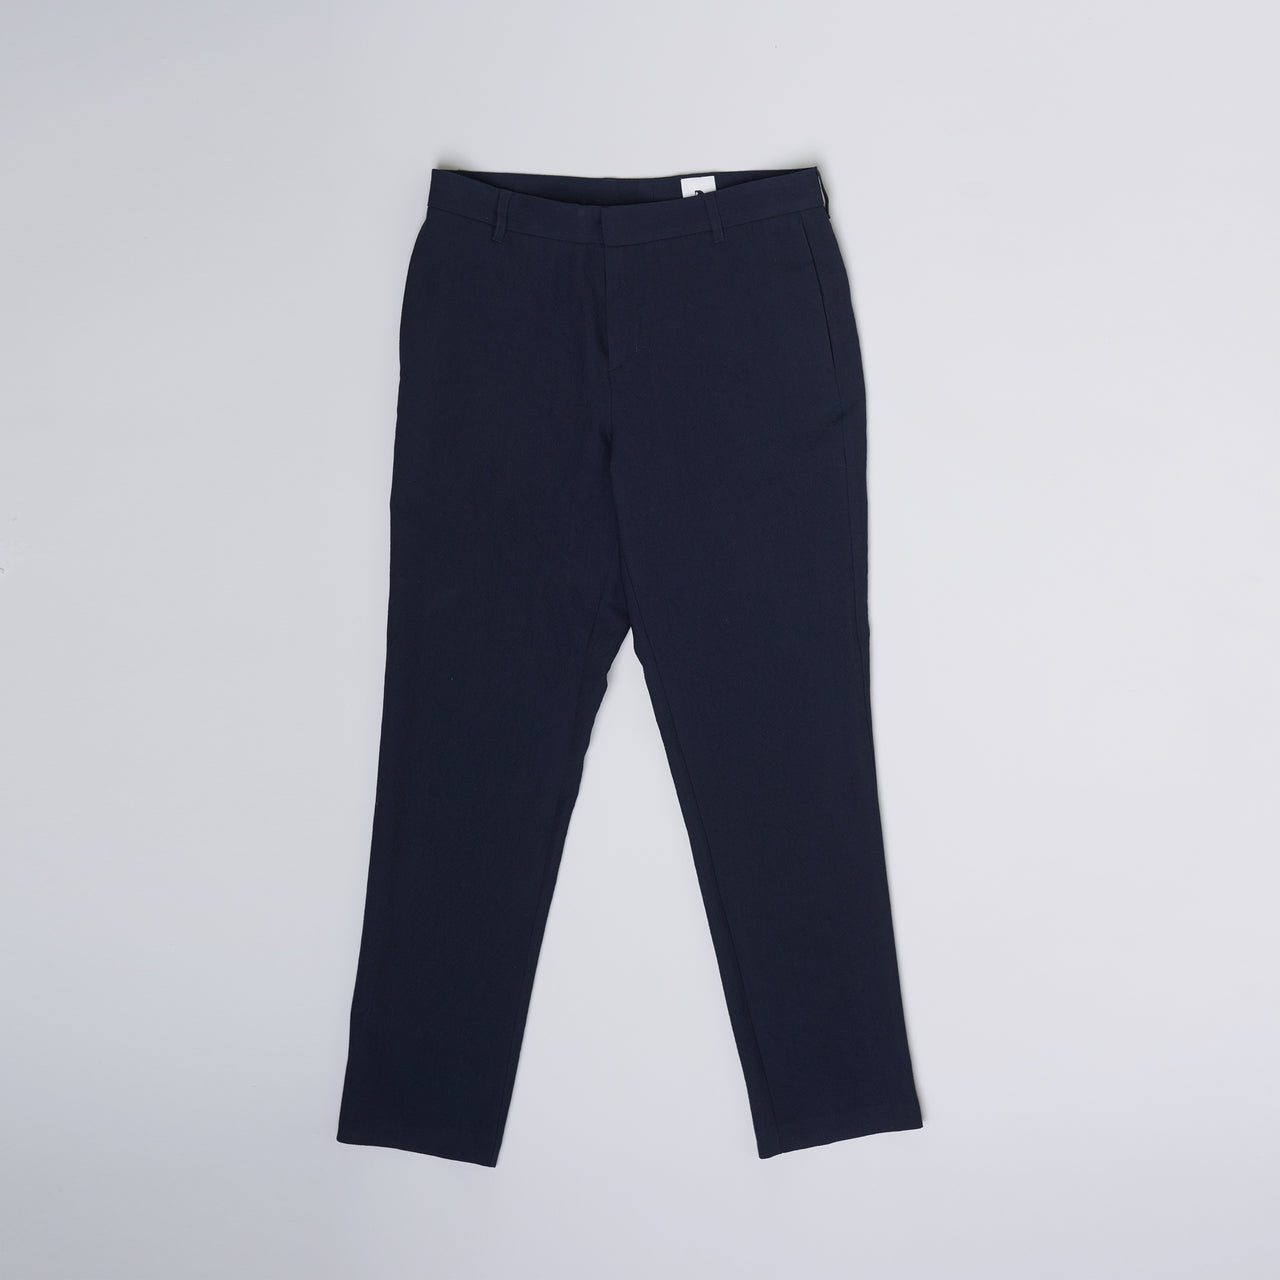 Trousers in the Finest Navy Blue Italian Soft Merino Wool by Bonotto